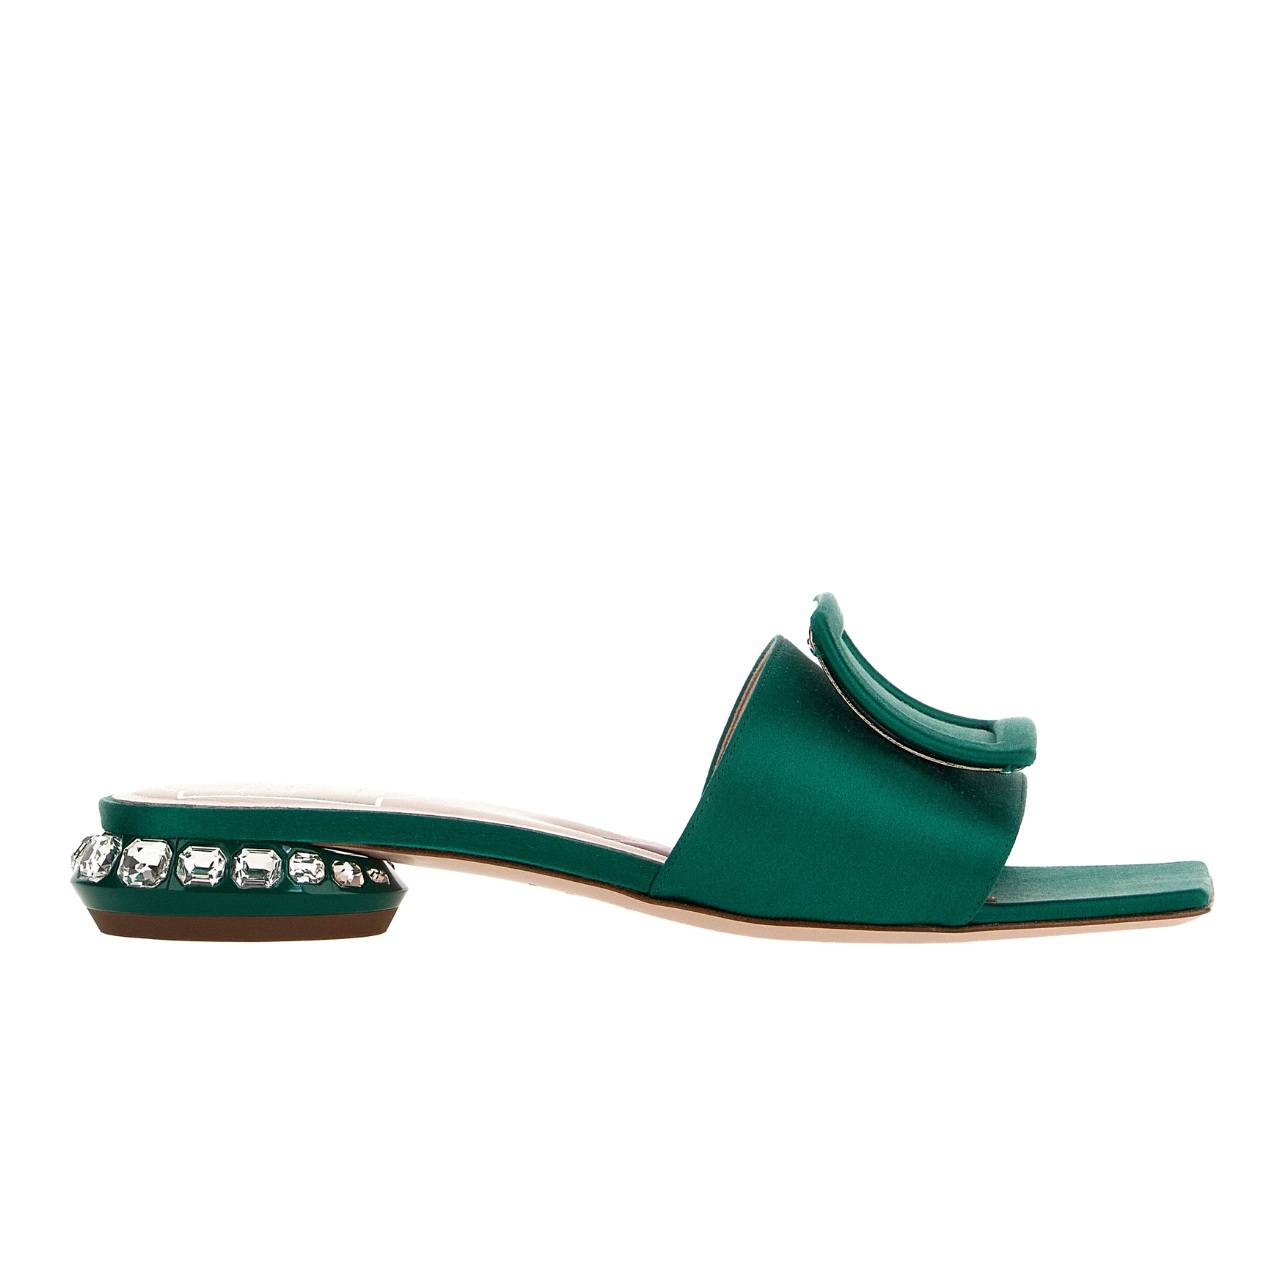 Emerald green Roger Vivier flat mule sandals with strass buckle and heel